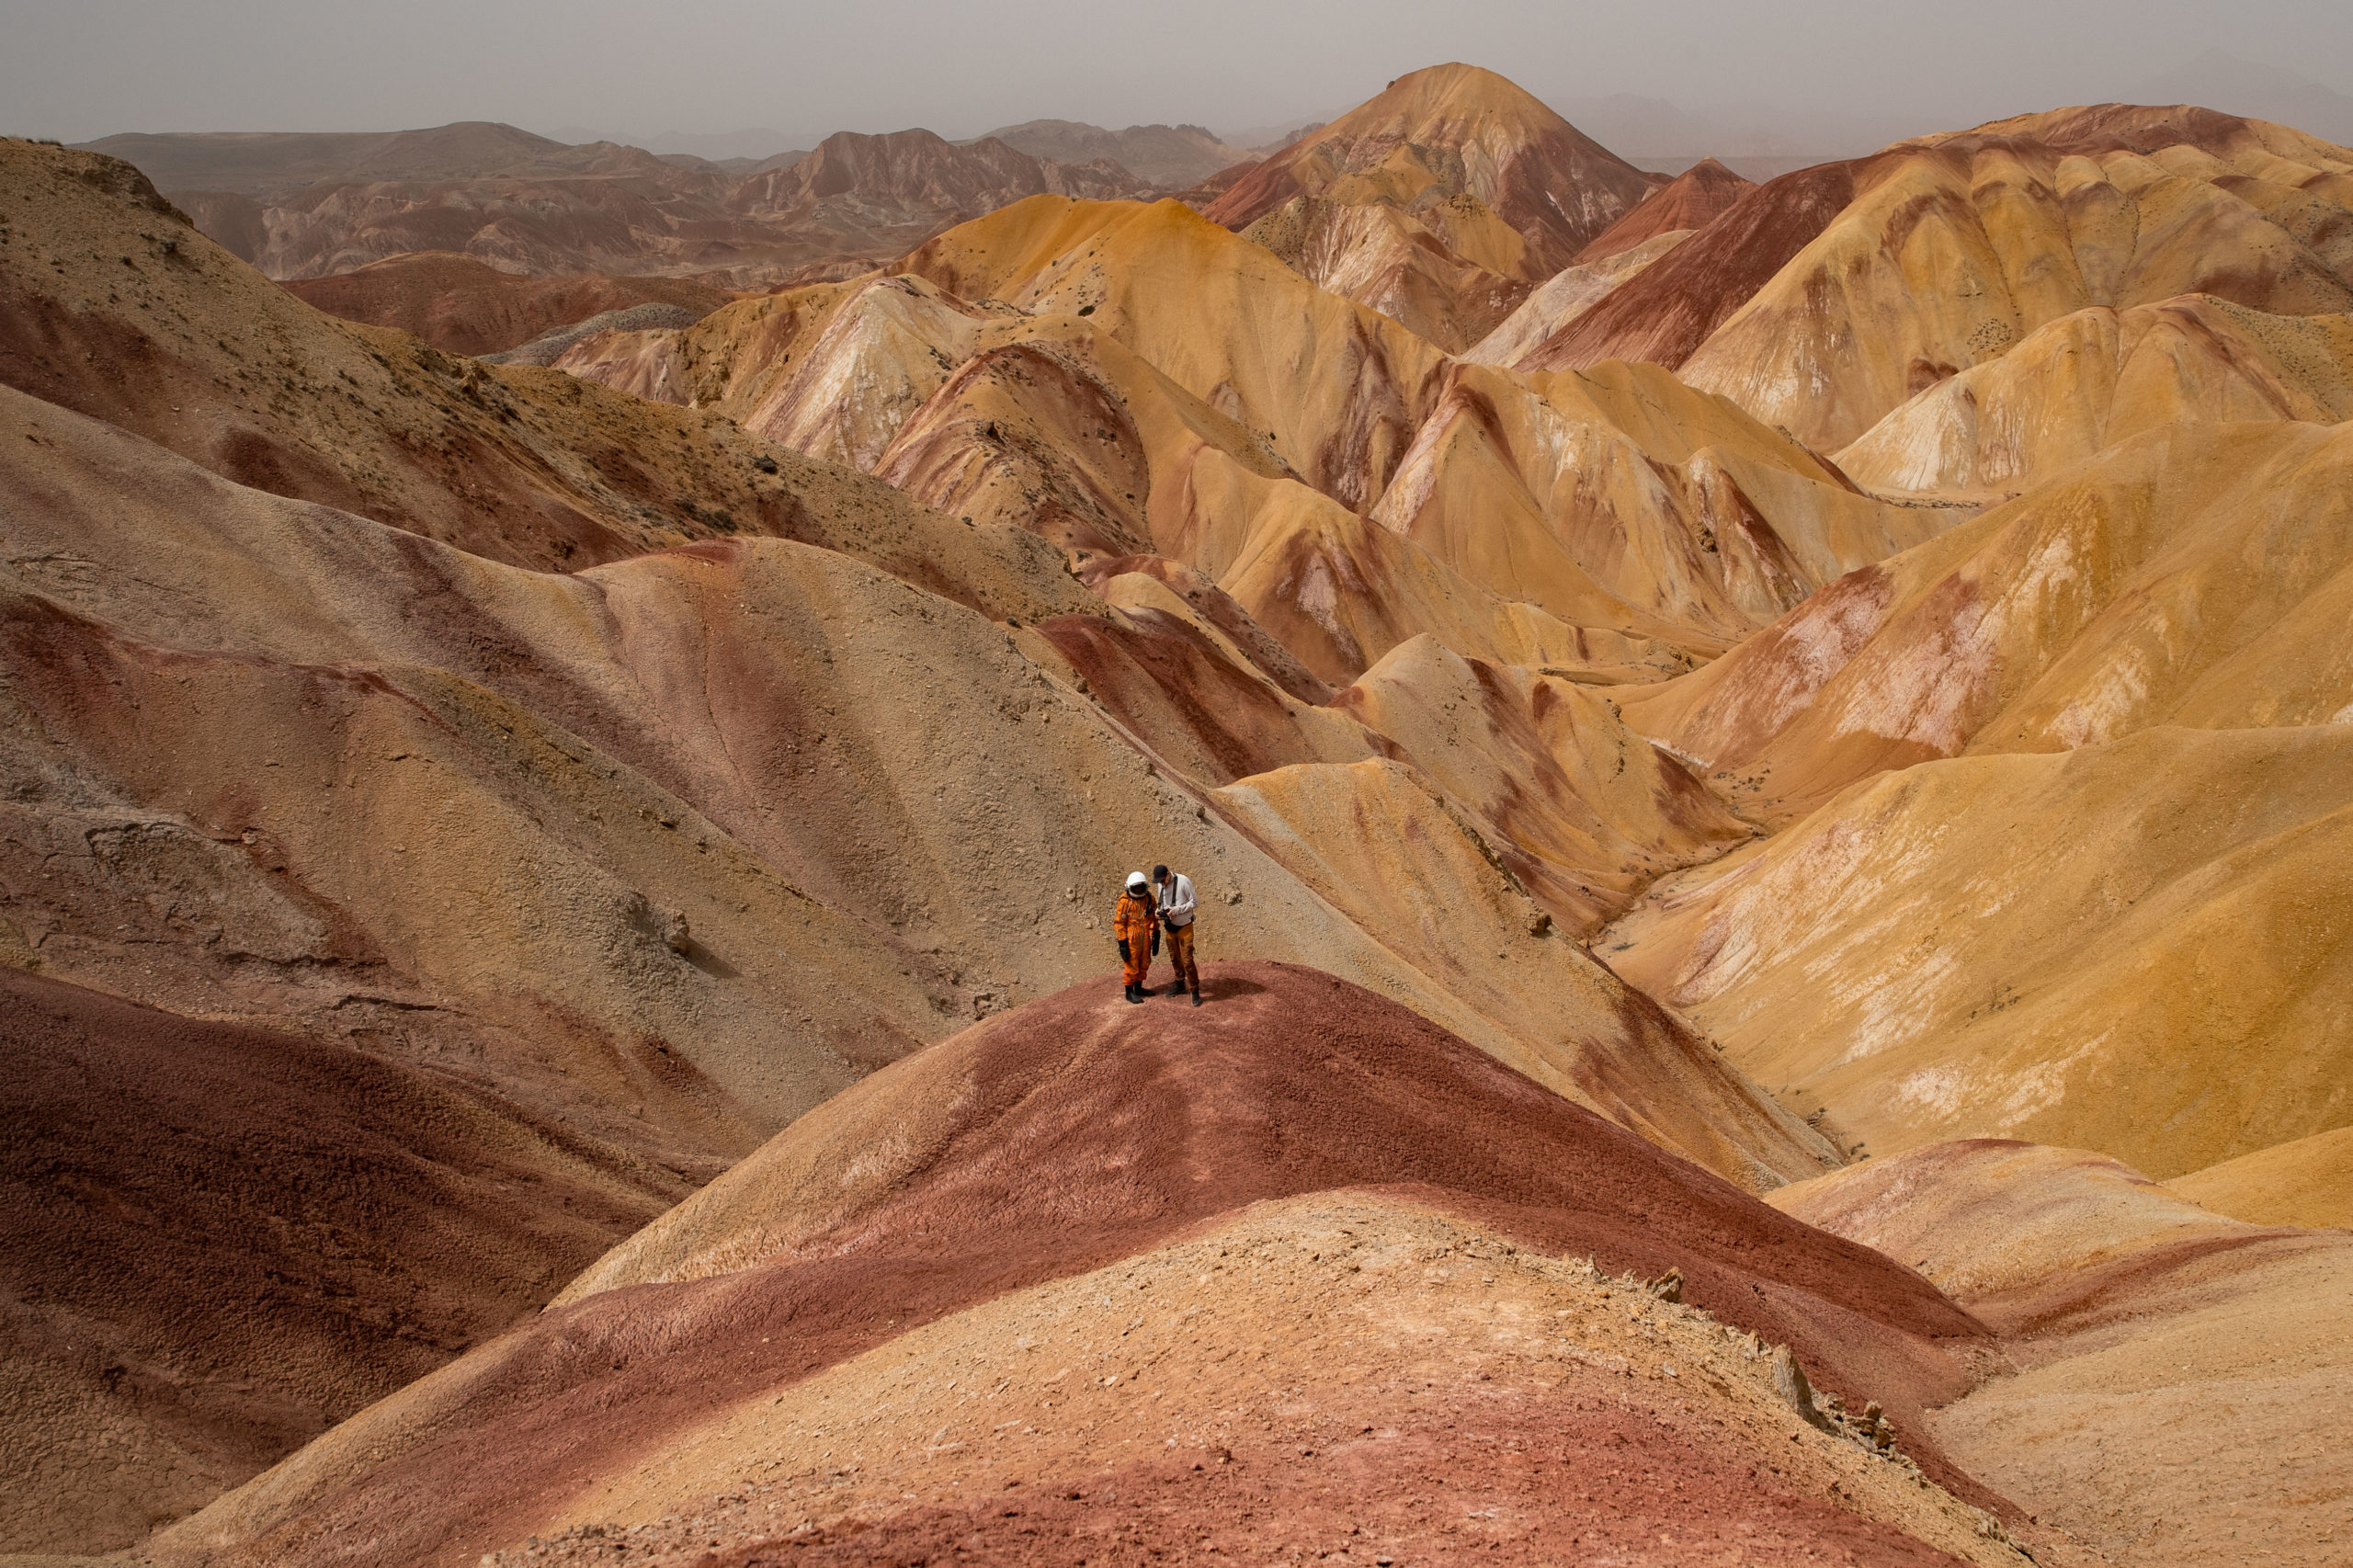 Behind the scenes photographing 'Space to Roam' in northern Iran